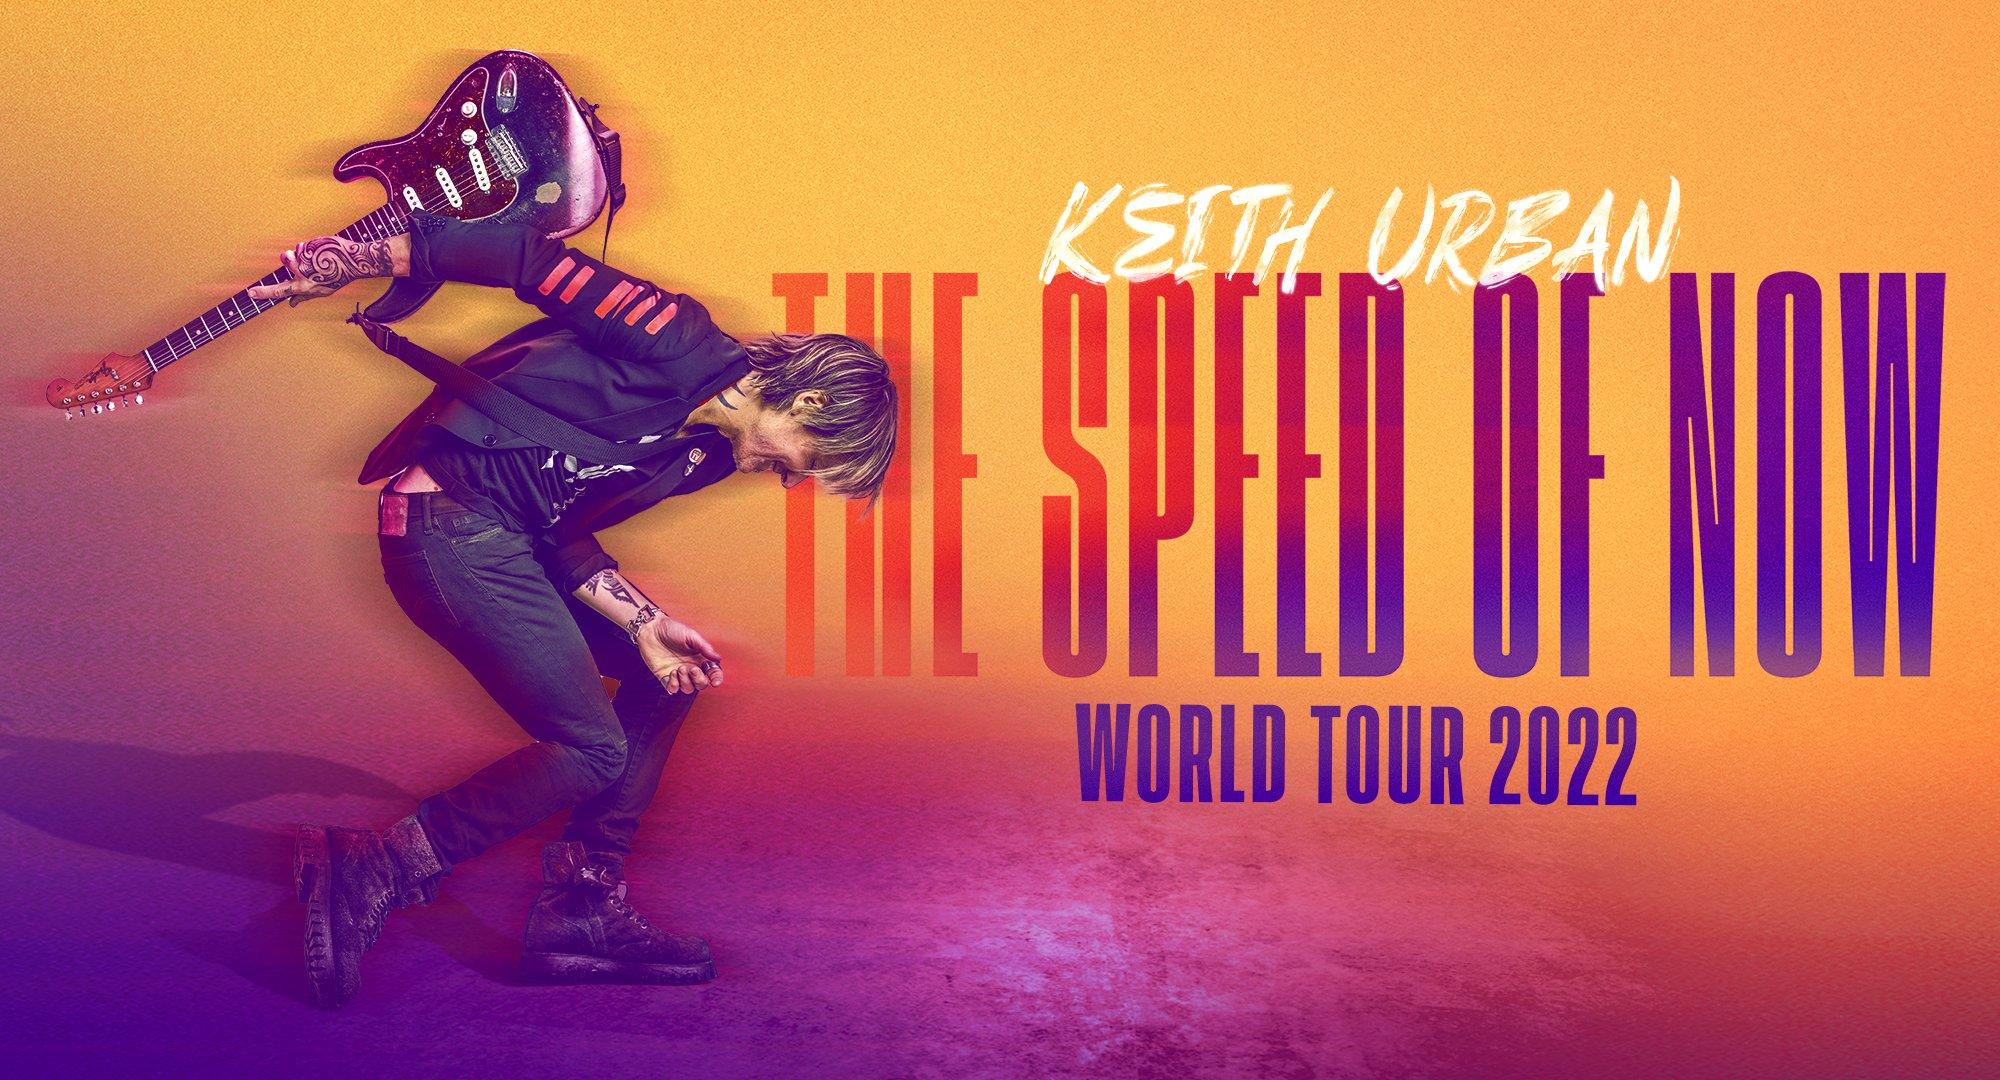 Keith Urban World Tour 2022 at the Ruoff Music Center